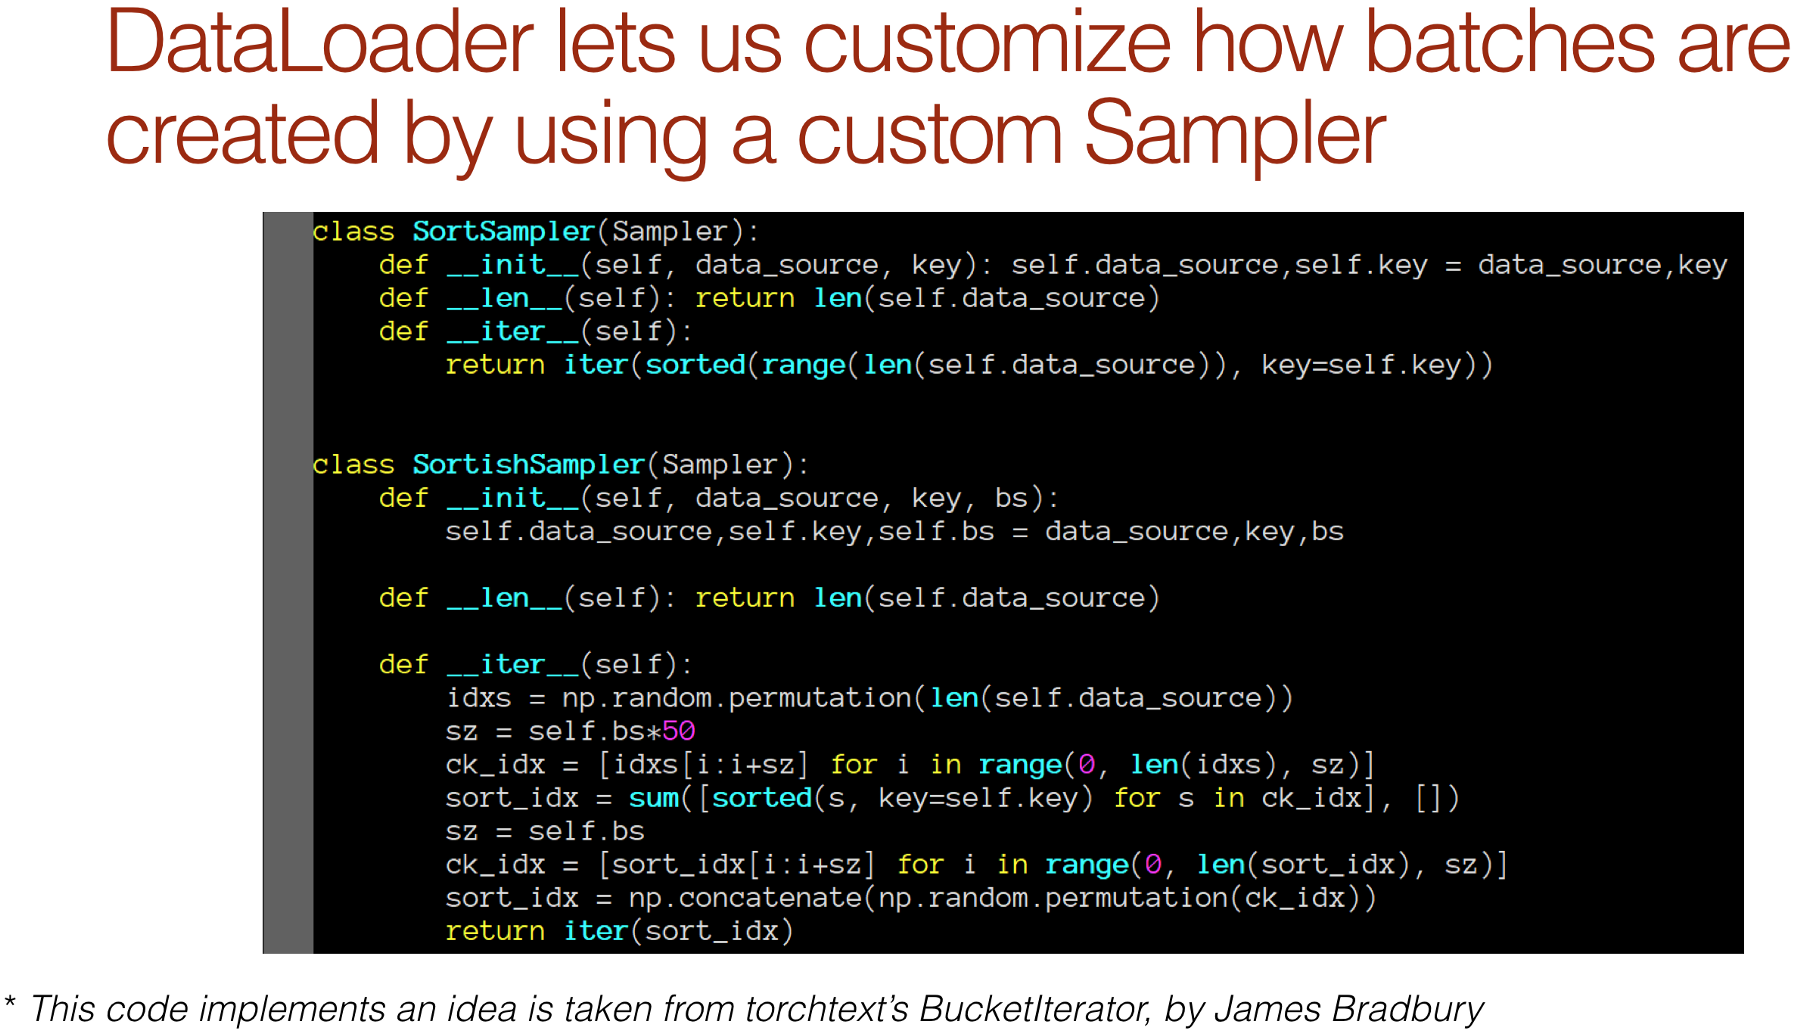 DataLoader lets us customize how batches are created by using a custom Sampler